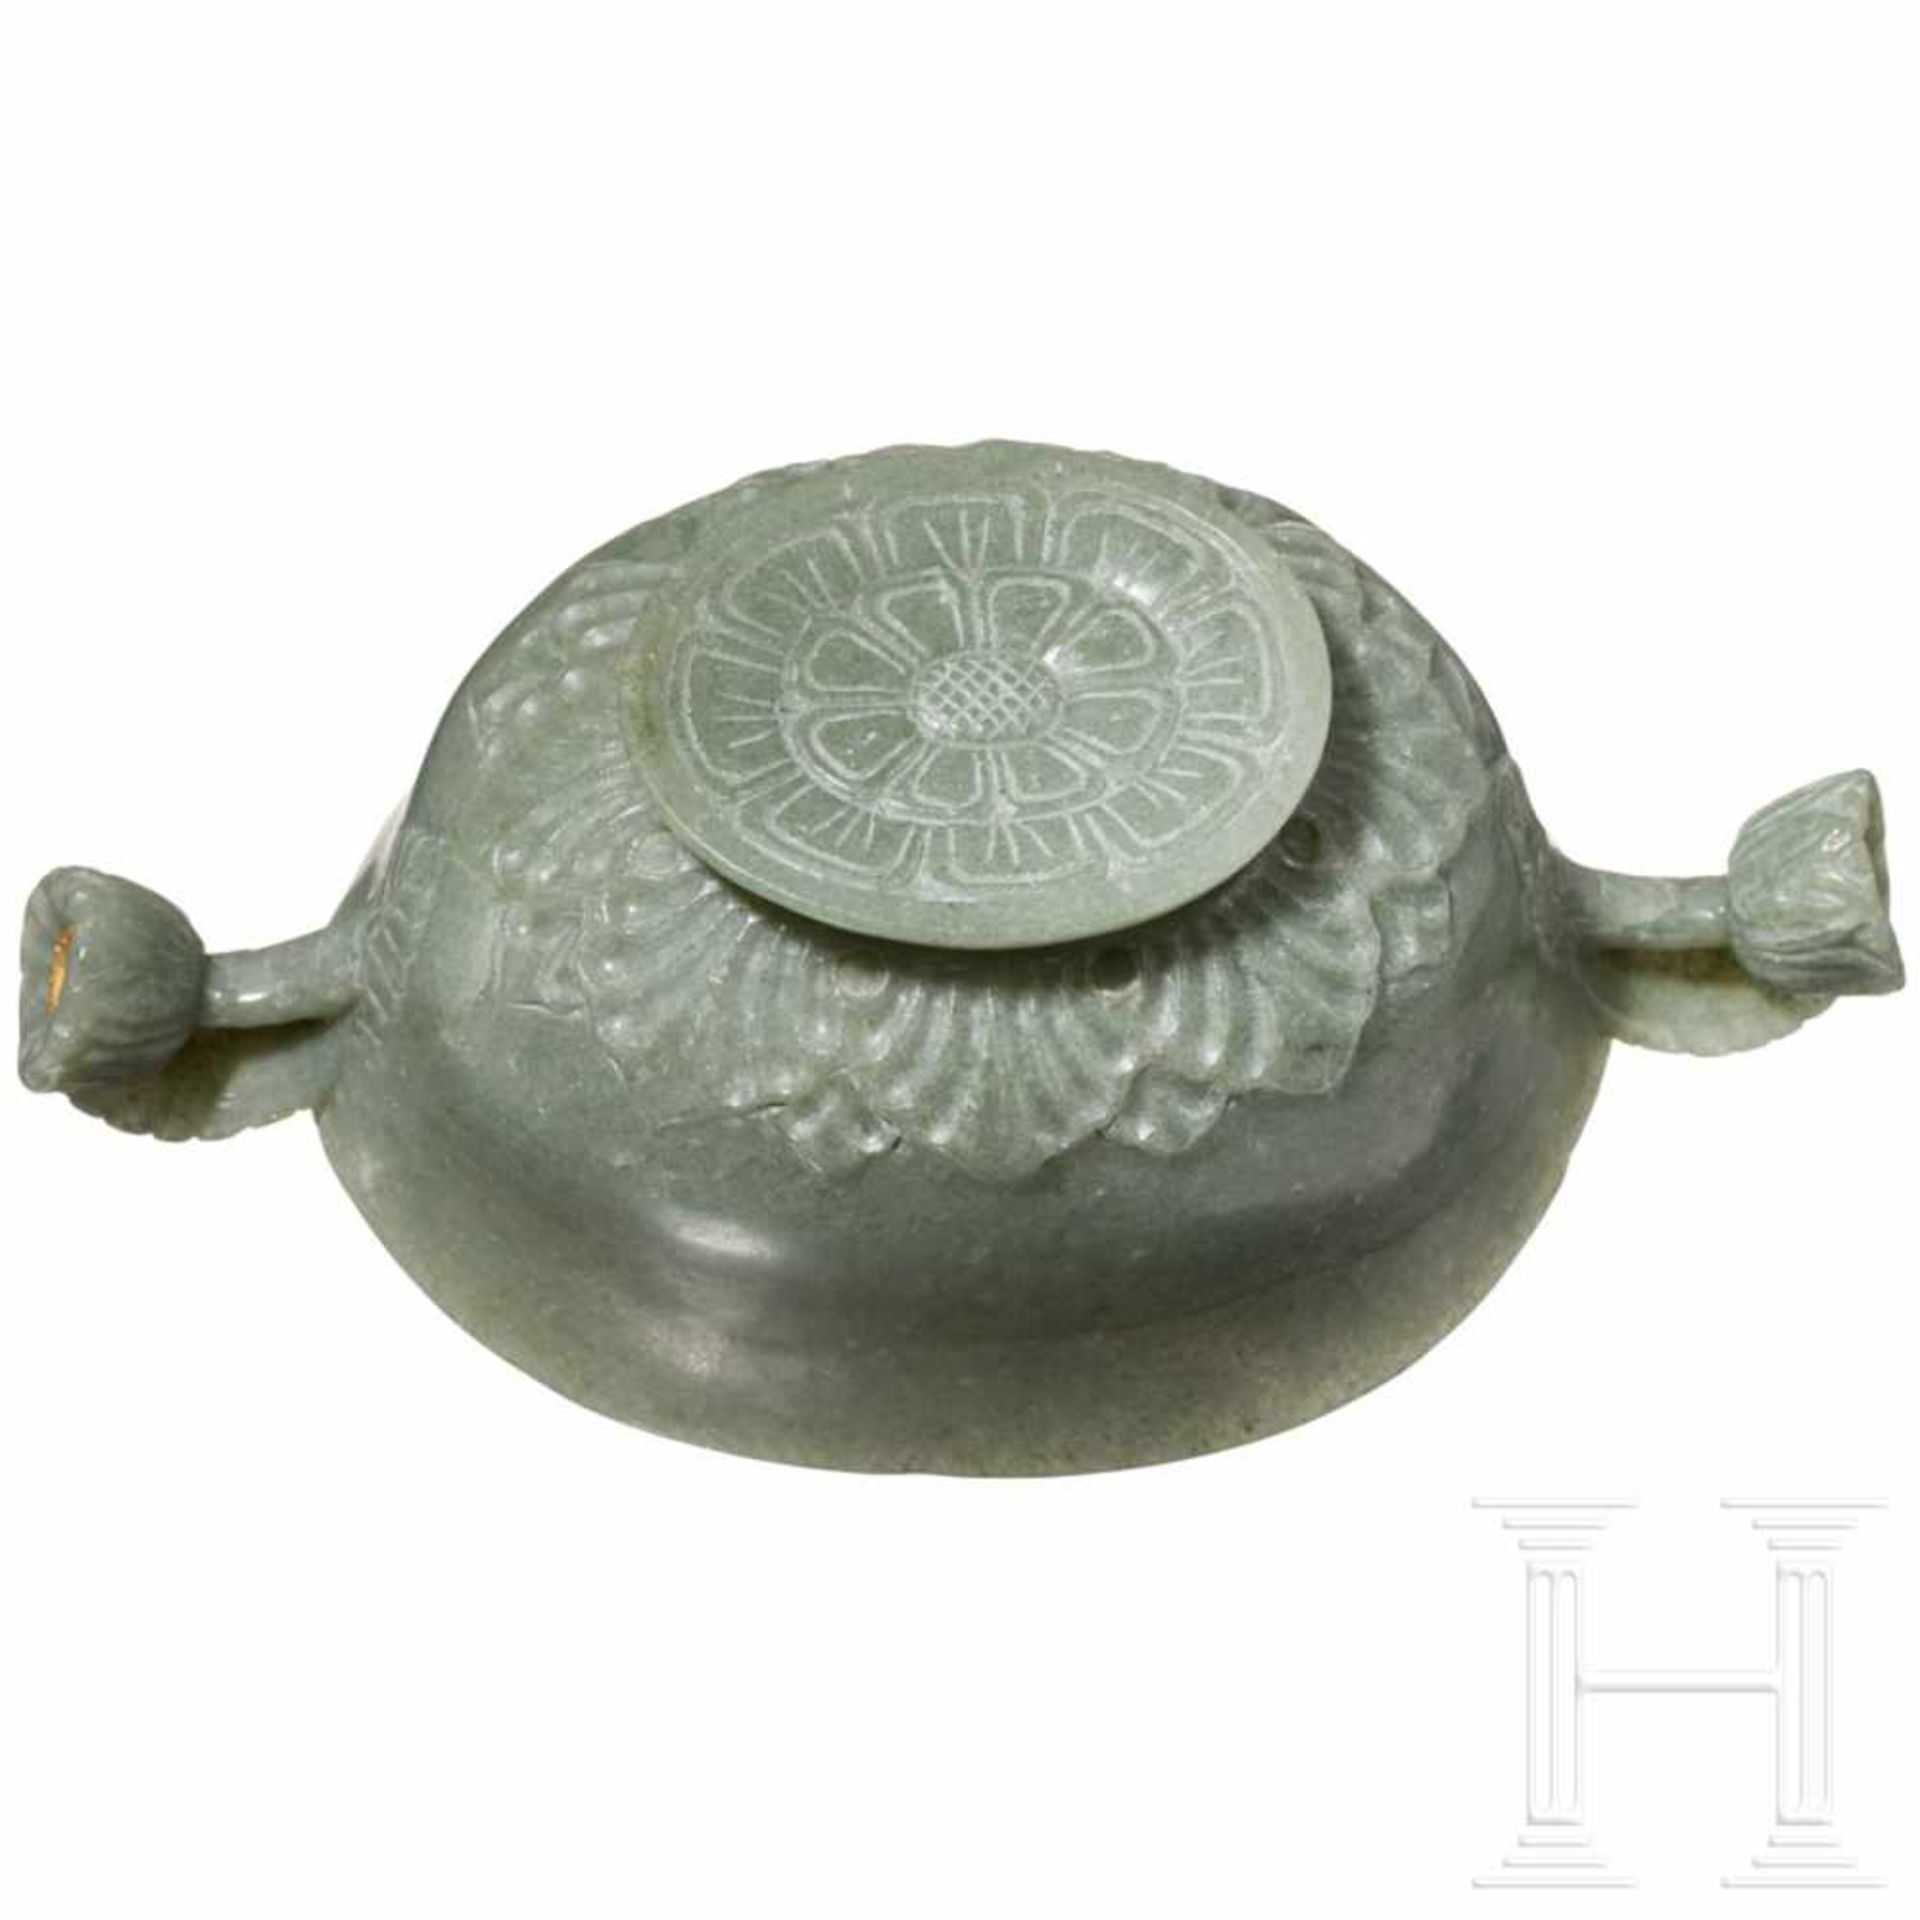 An Indian gold and diamond-studded jade receptacle, 20th centuryOval bowl in greyish-green jade with - Bild 5 aus 5